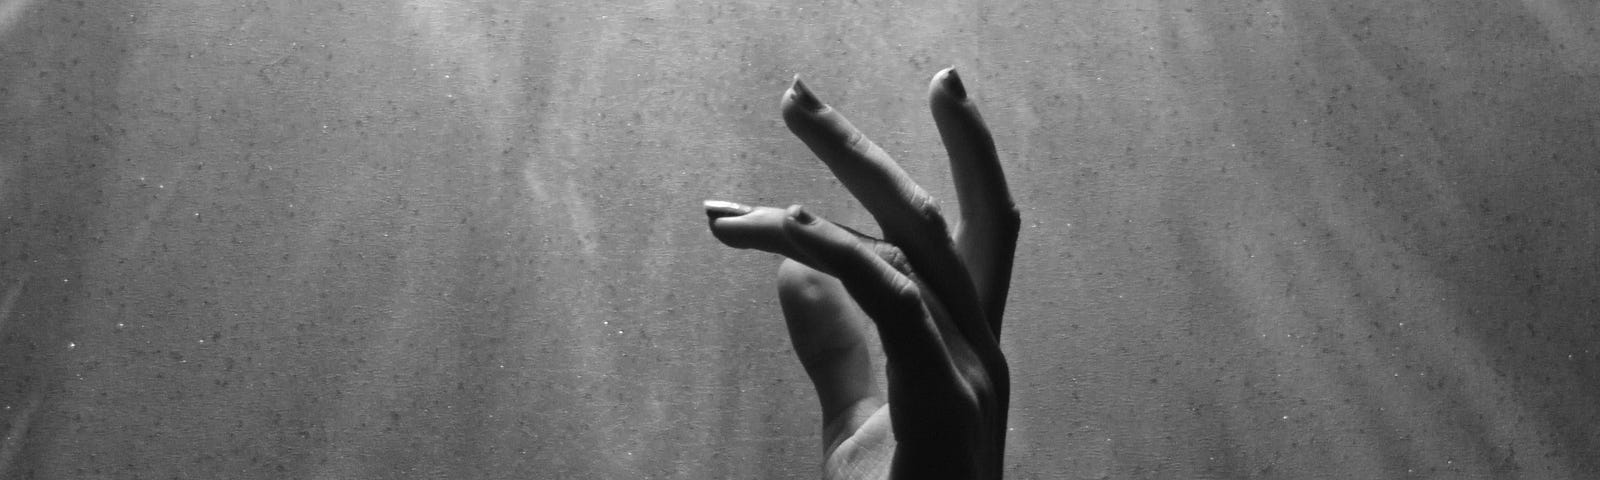 black and white picture of a woman’s hands floating under water- you can see light streaming down